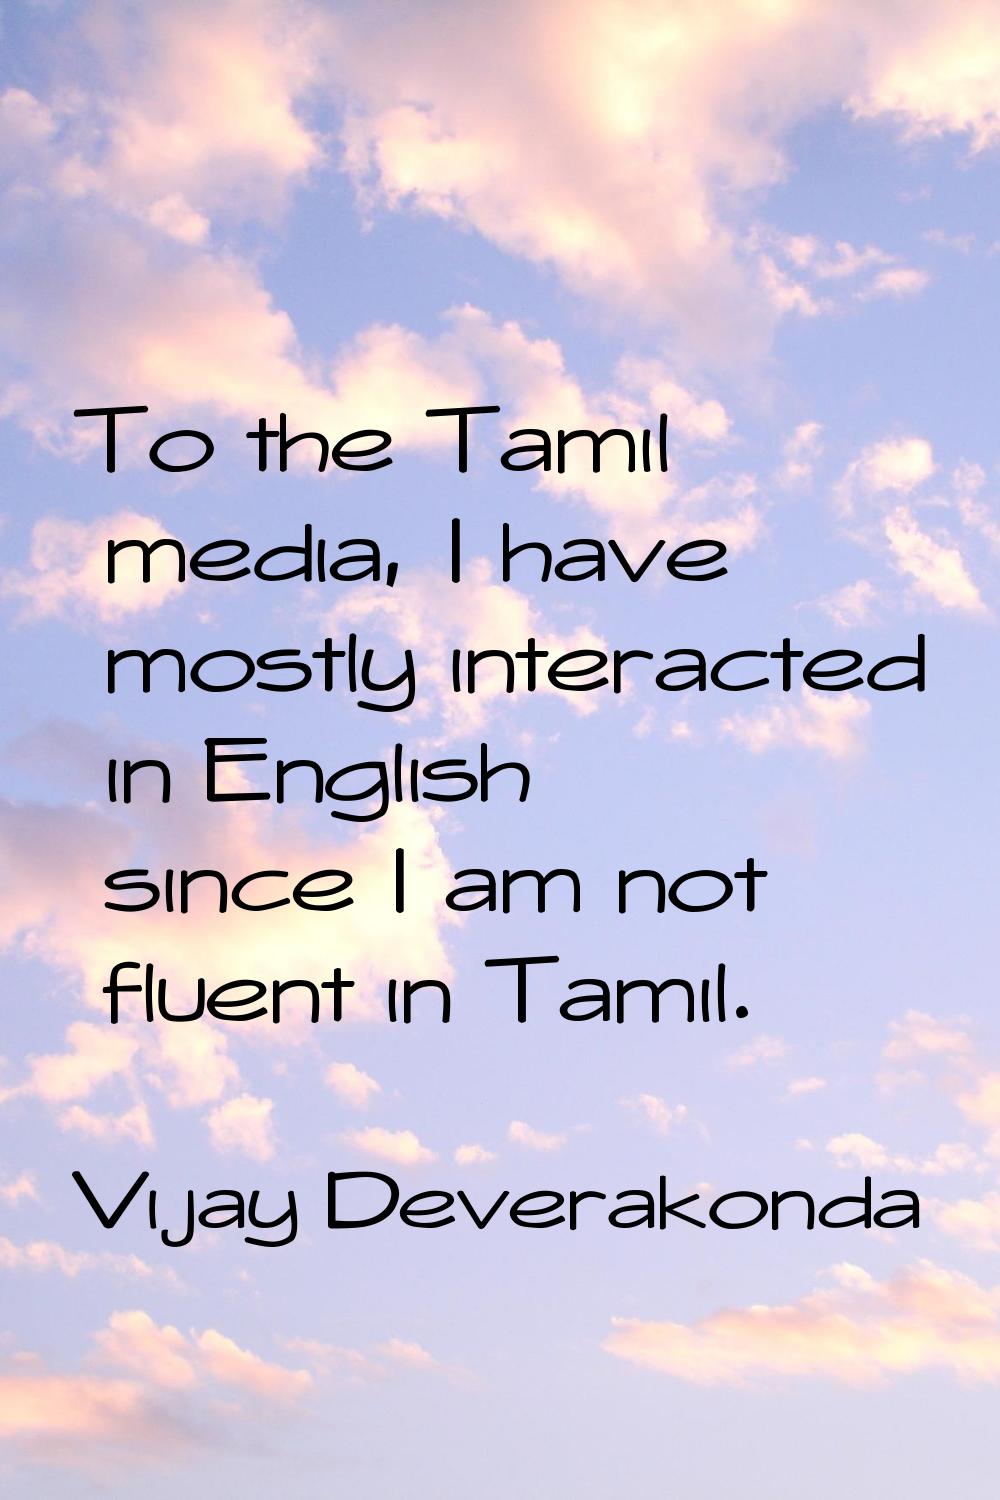 To the Tamil media, I have mostly interacted in English since I am not fluent in Tamil.